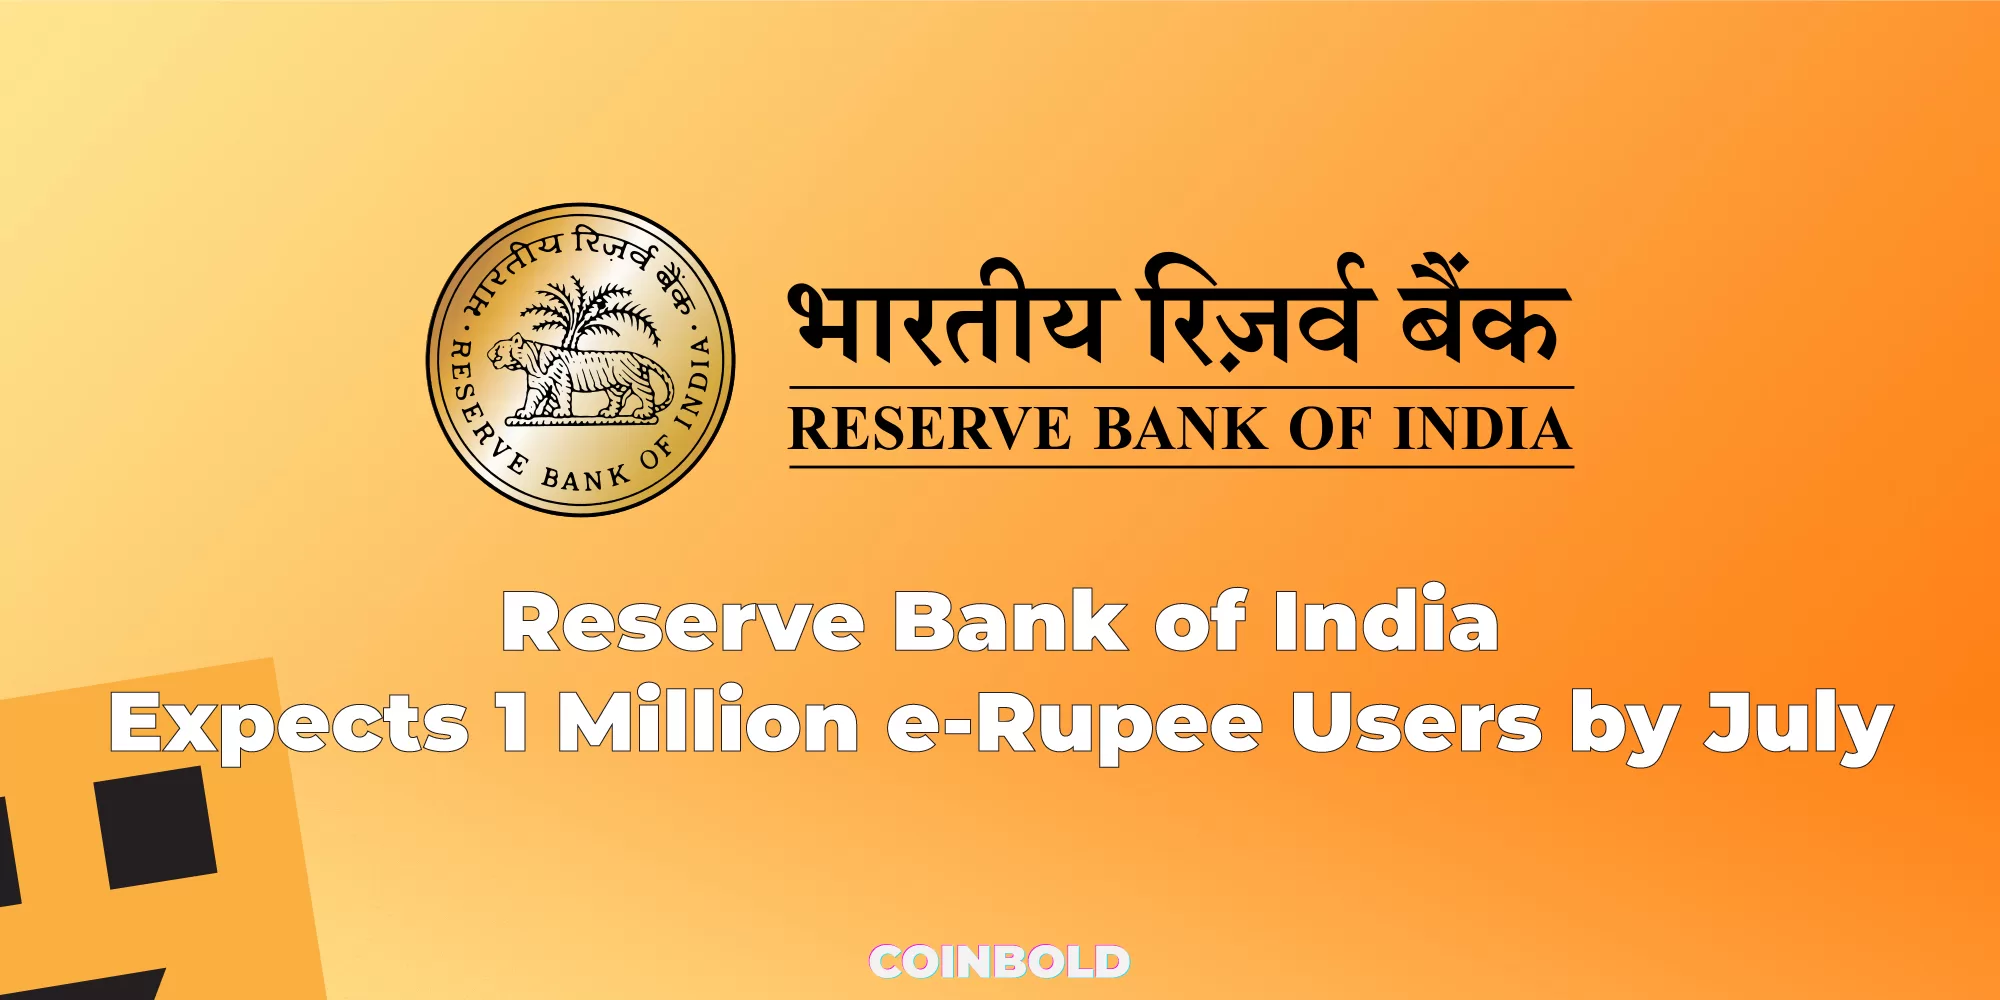 Reserve Bank of India Expects 1 Million e-Rupee Users by July